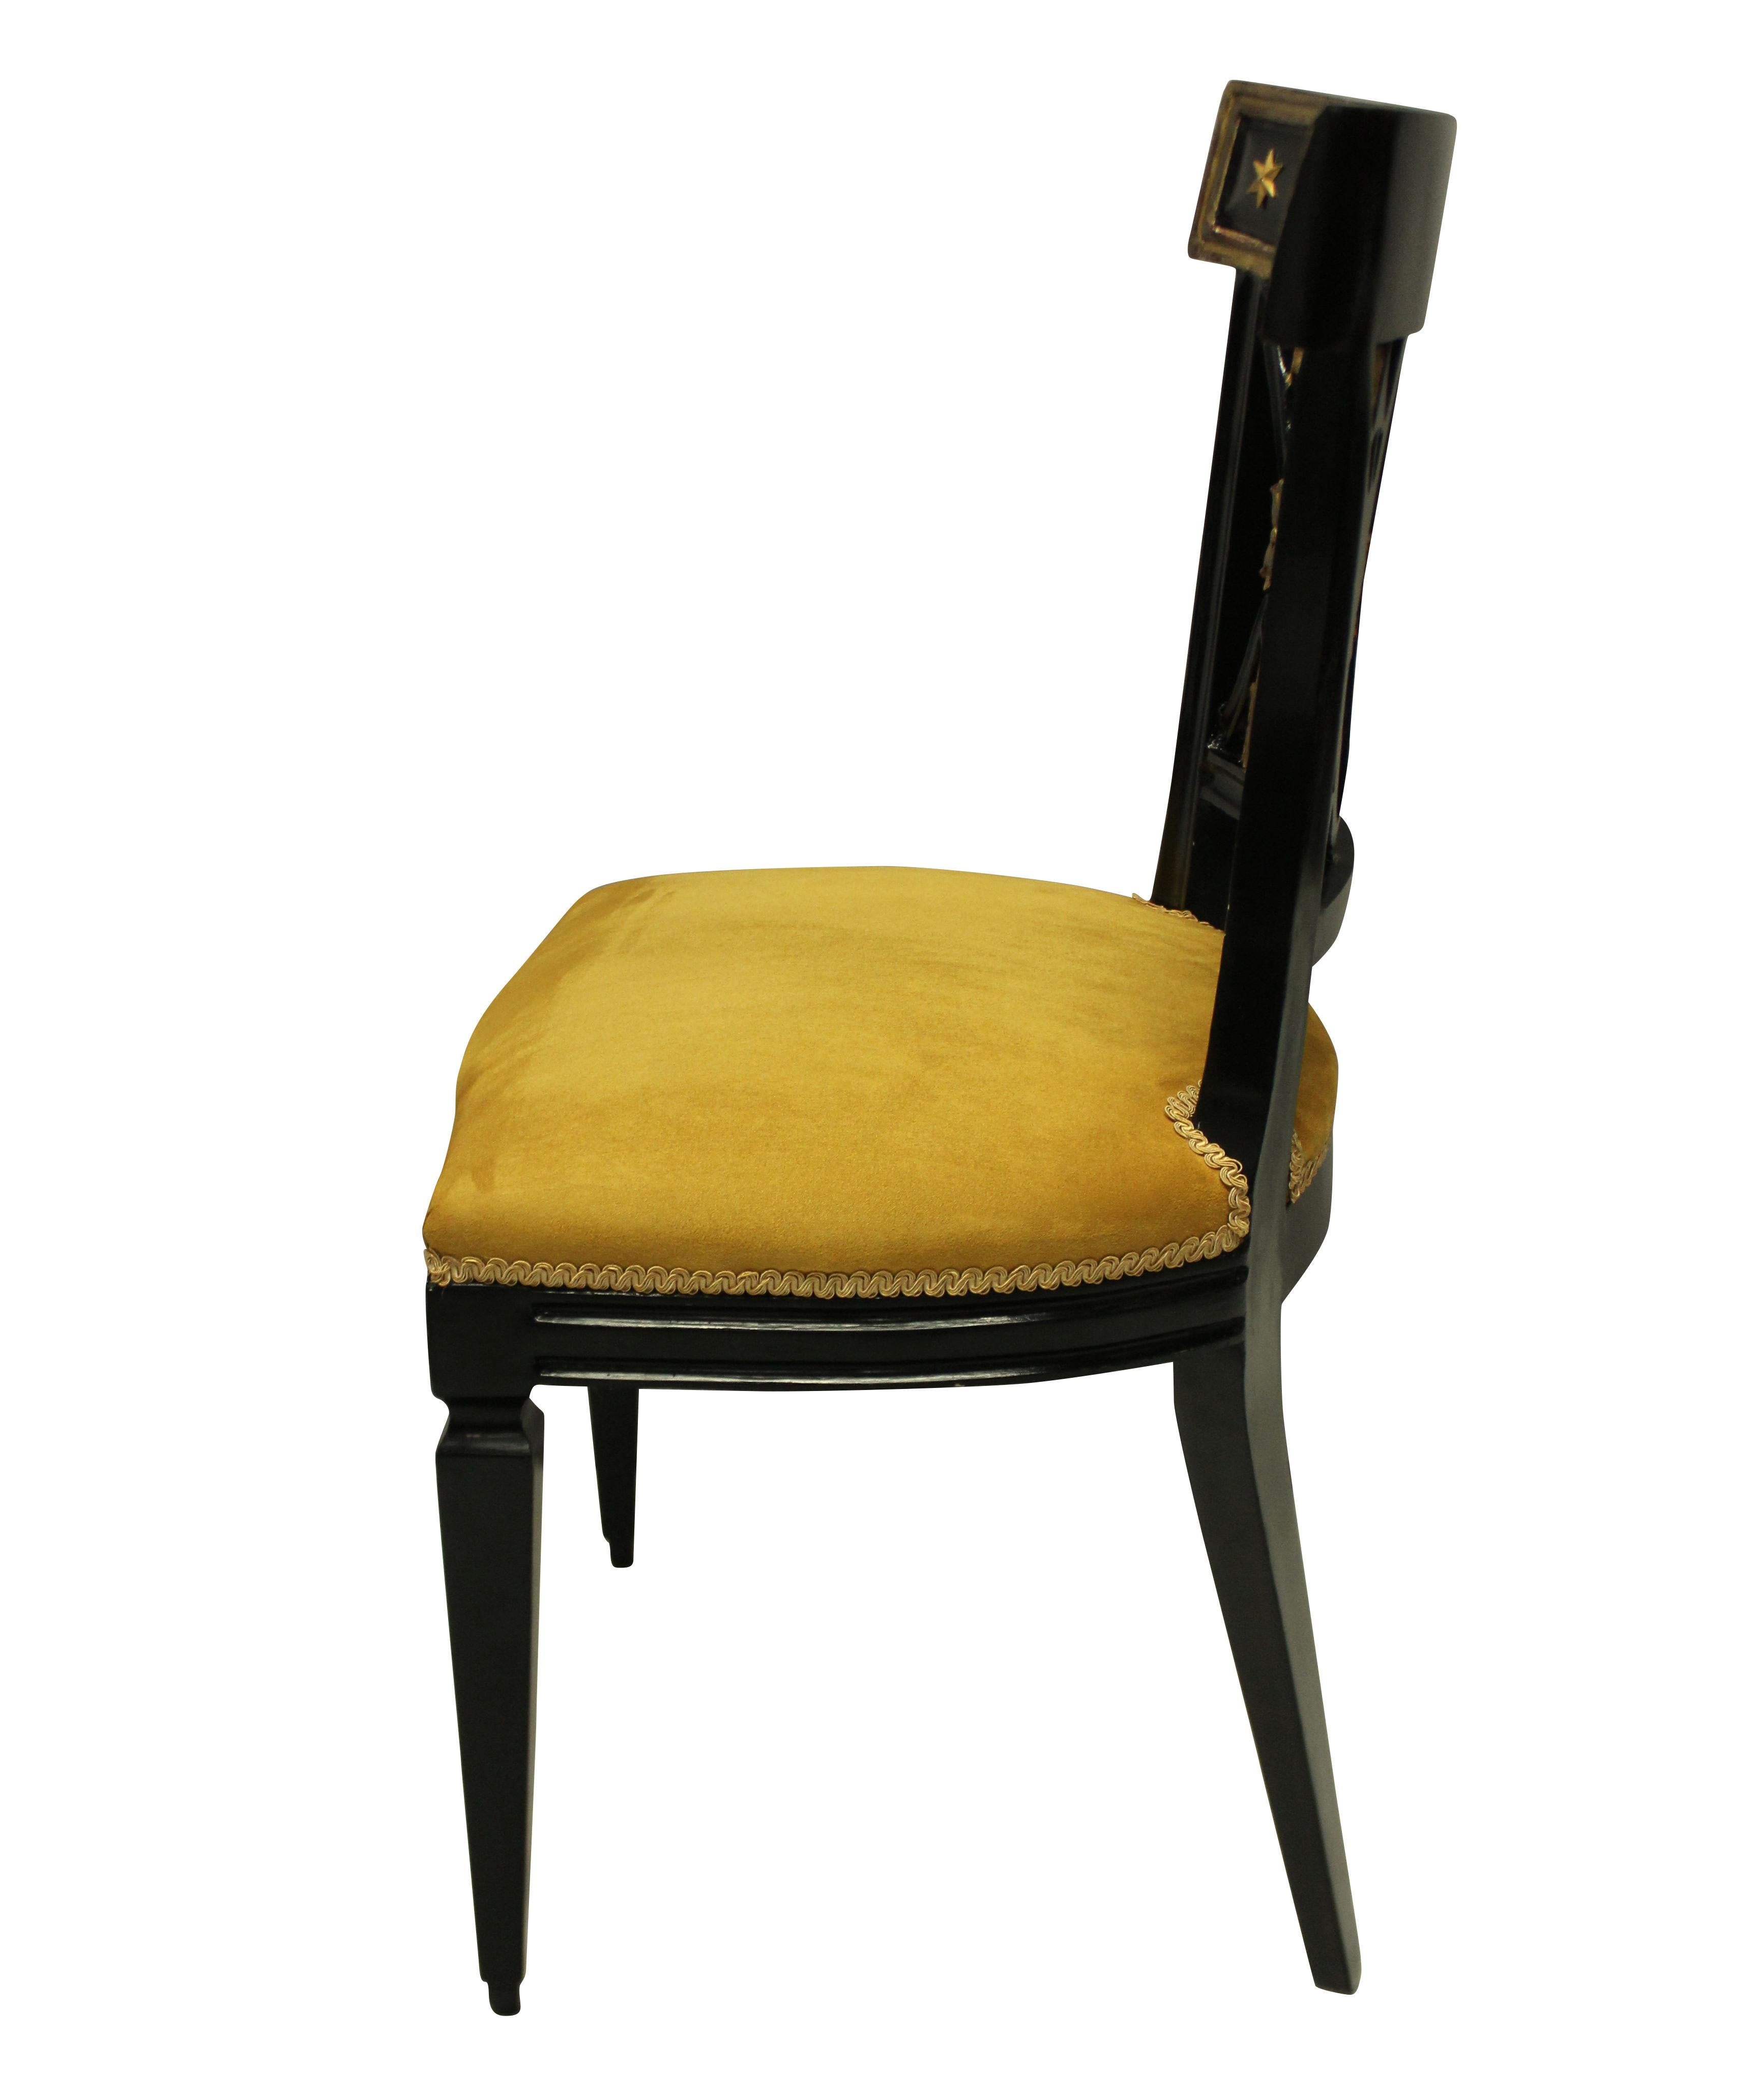 Ebonized Pair of French Empire Revival Hall Chairs